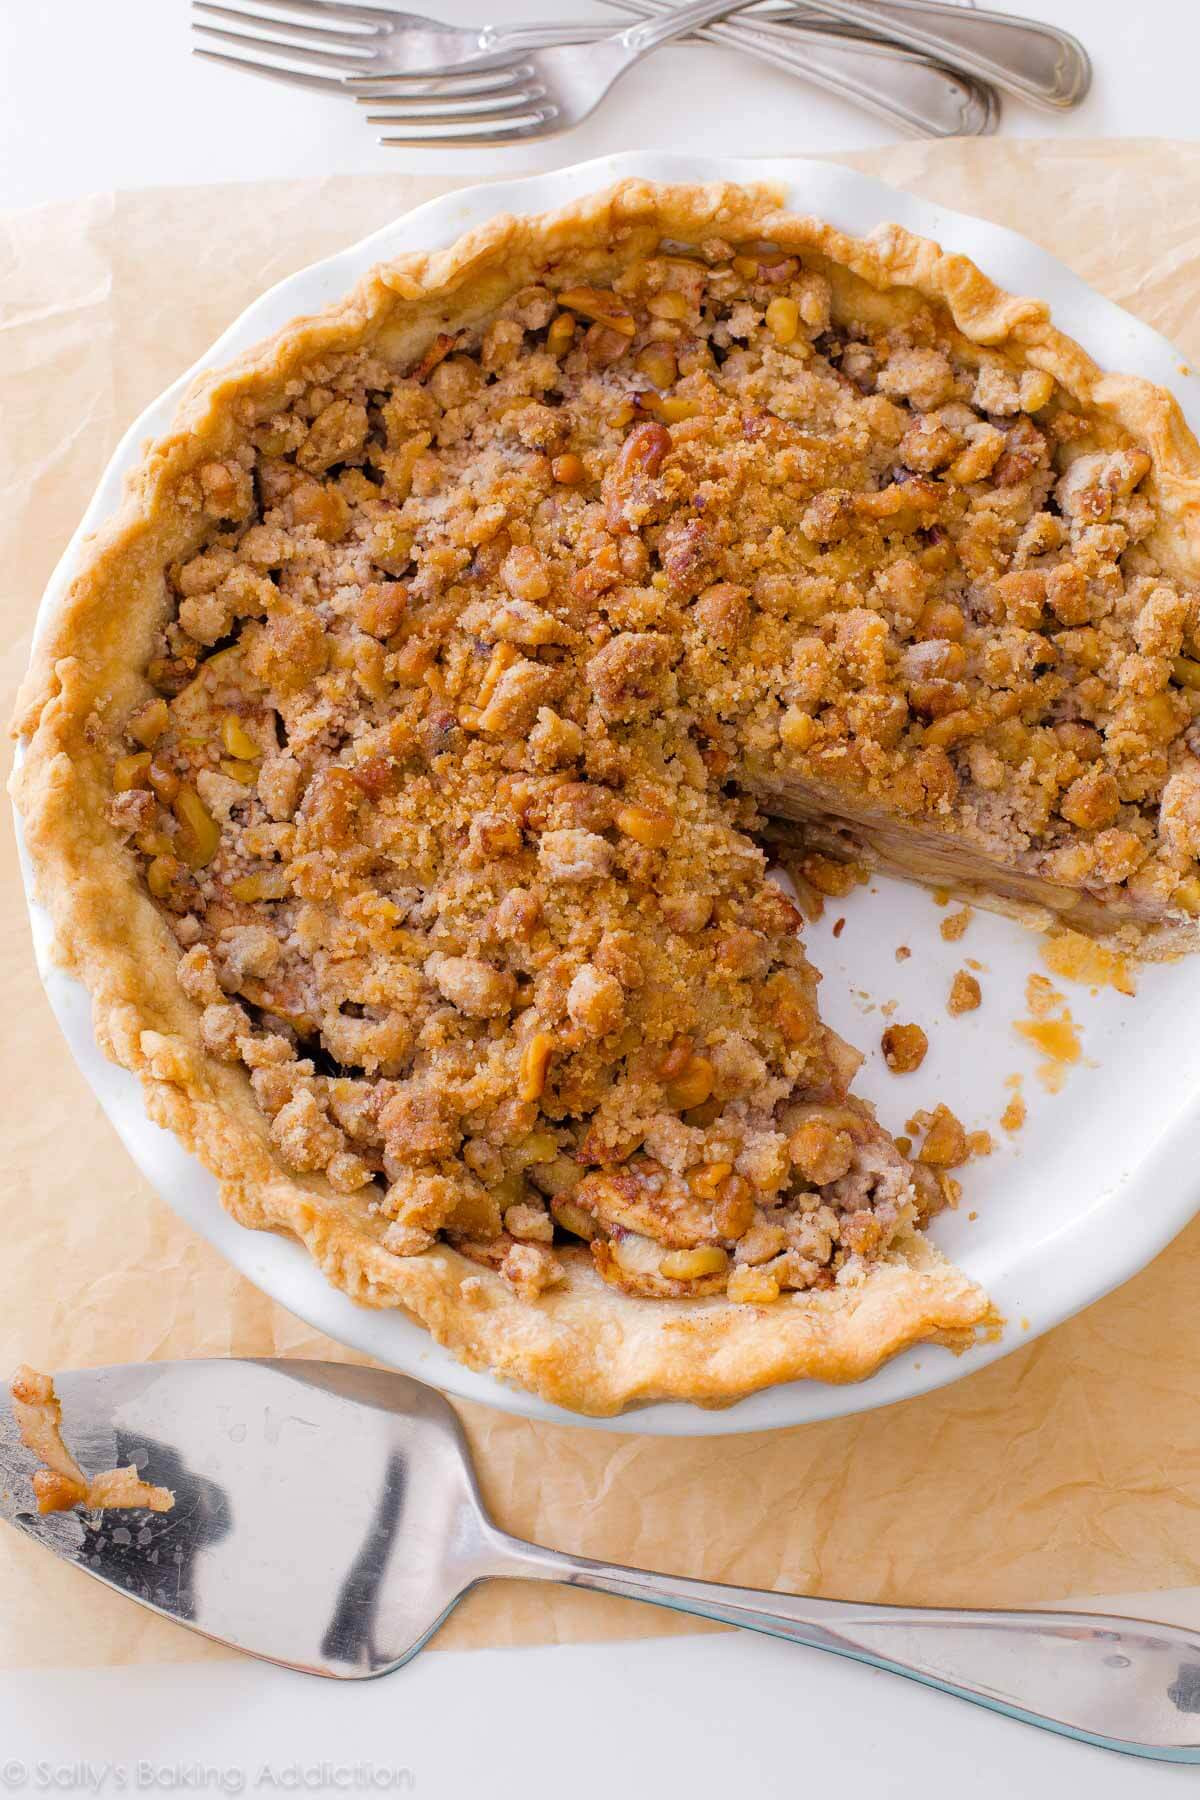 Apple Pie With Crumble Topping
 Apple Crumble Pie Sallys Baking Addiction